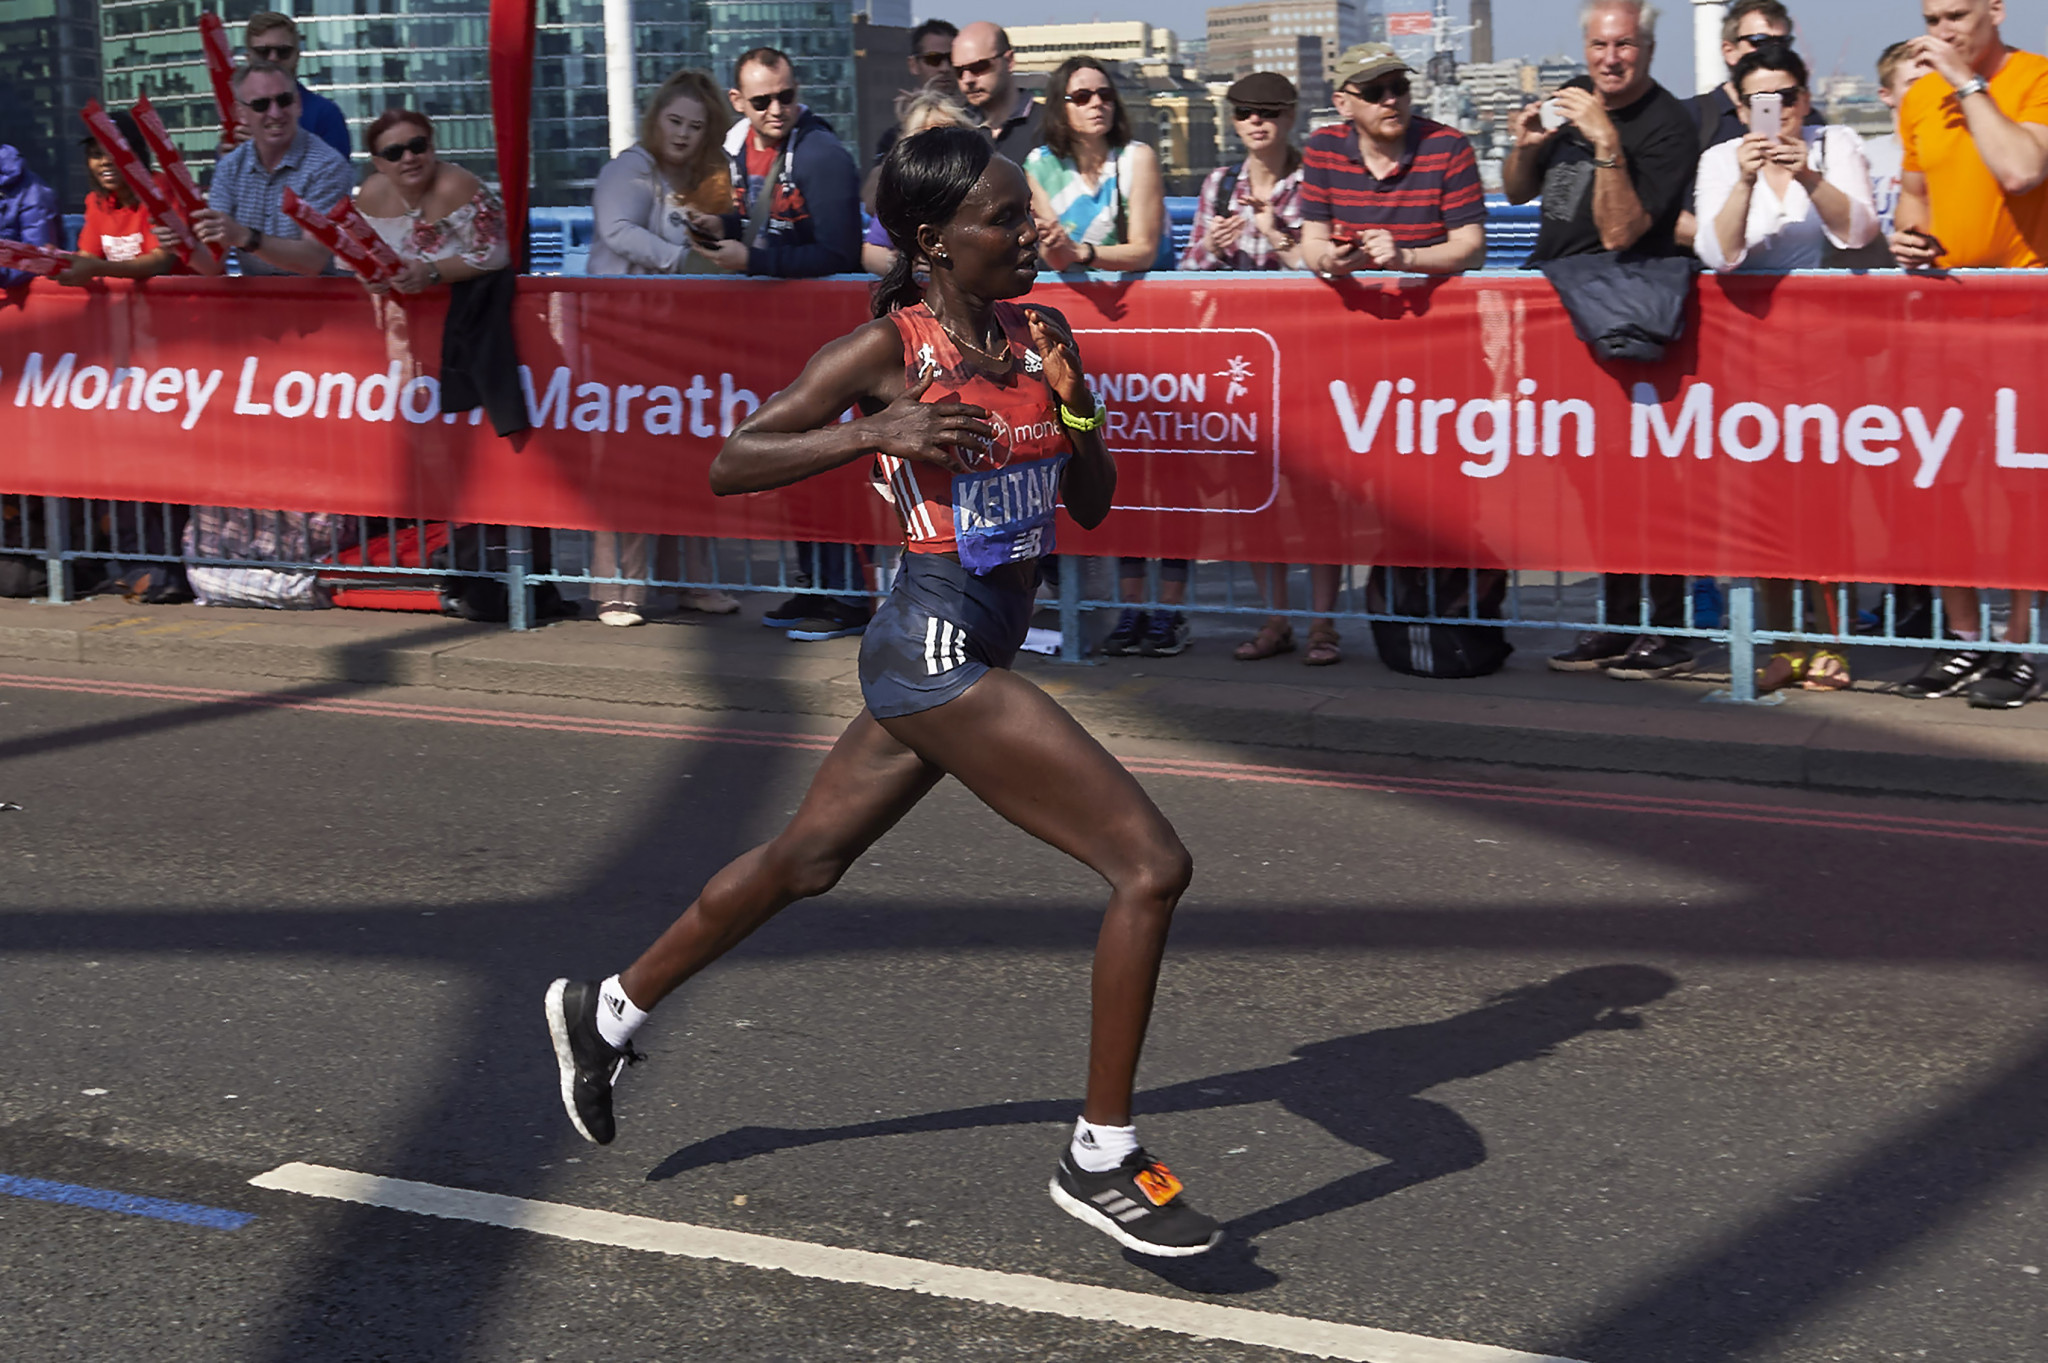 Kenya's Mary Keitany went out far too quickly in pursuit of breaking Paula Radcliffe's longstanding world record ©Getty Images